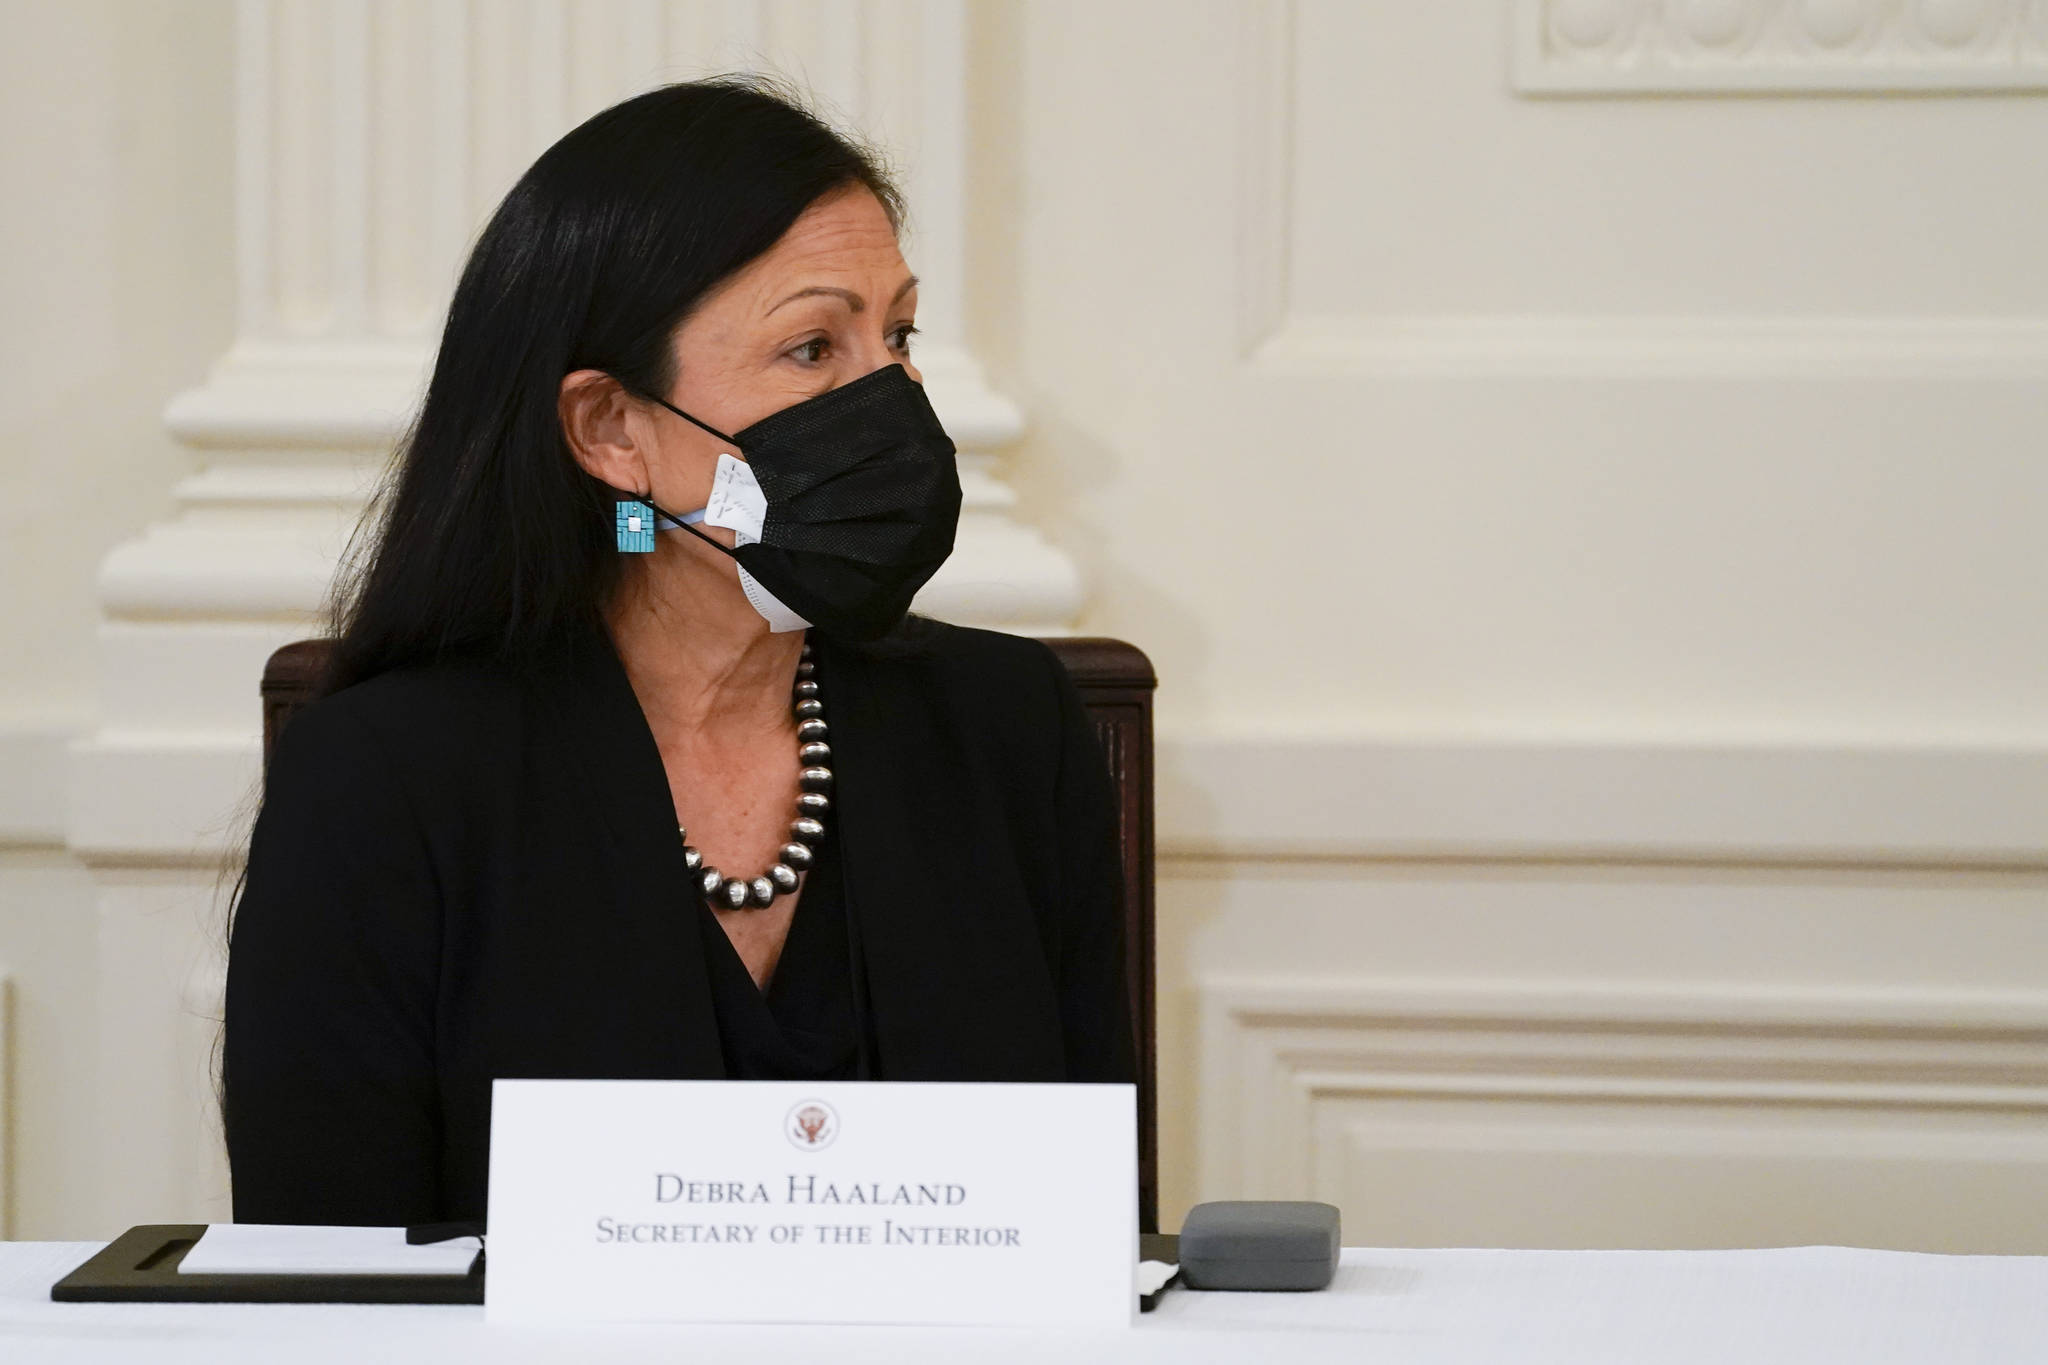 Secretary of the Interior Secretary Deb Haaland attends a Cabinet meeting with President Joe Biden in the East Room of the White House, Thursday, April 1, 2021, in Washington. (AP Photo / Evan Vucci)